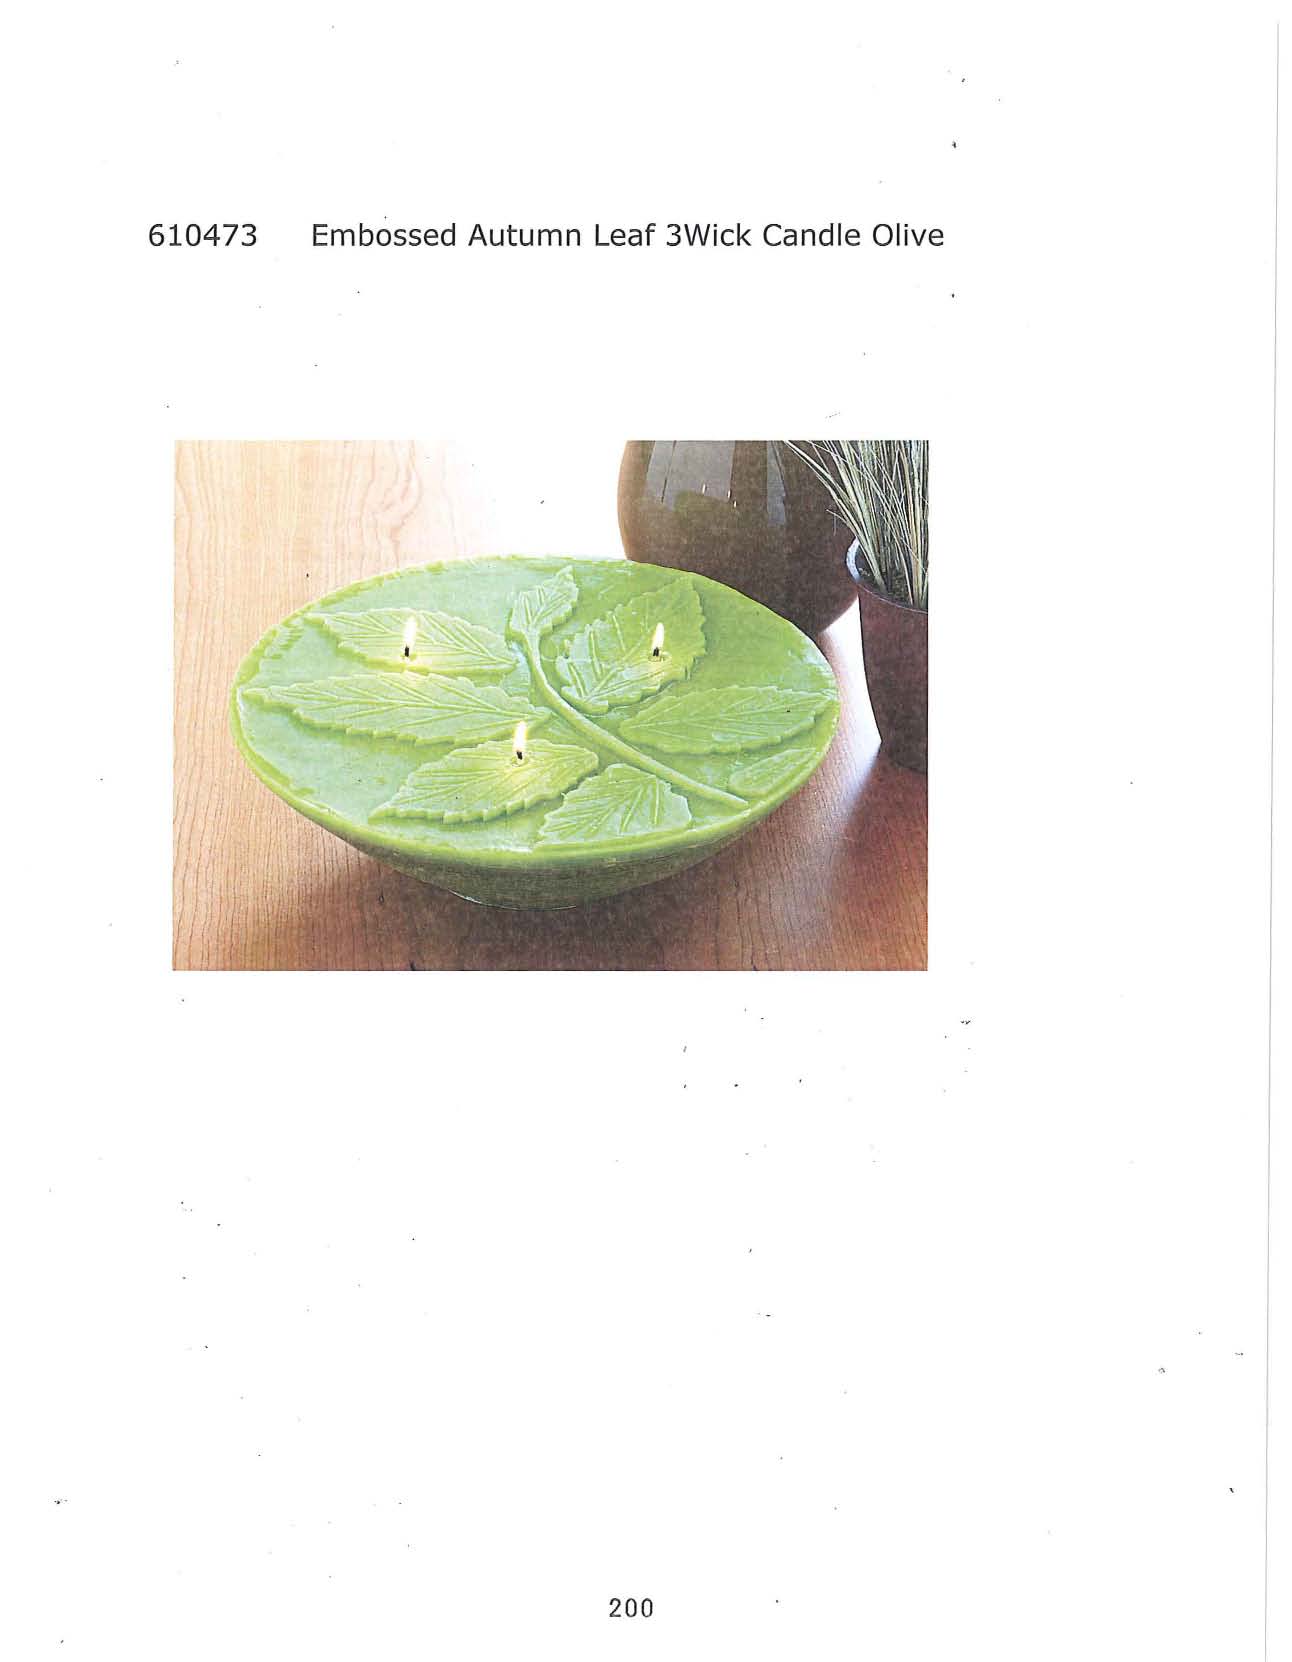 Embossed Autumn Leaf 3-Wick Candle - Olive